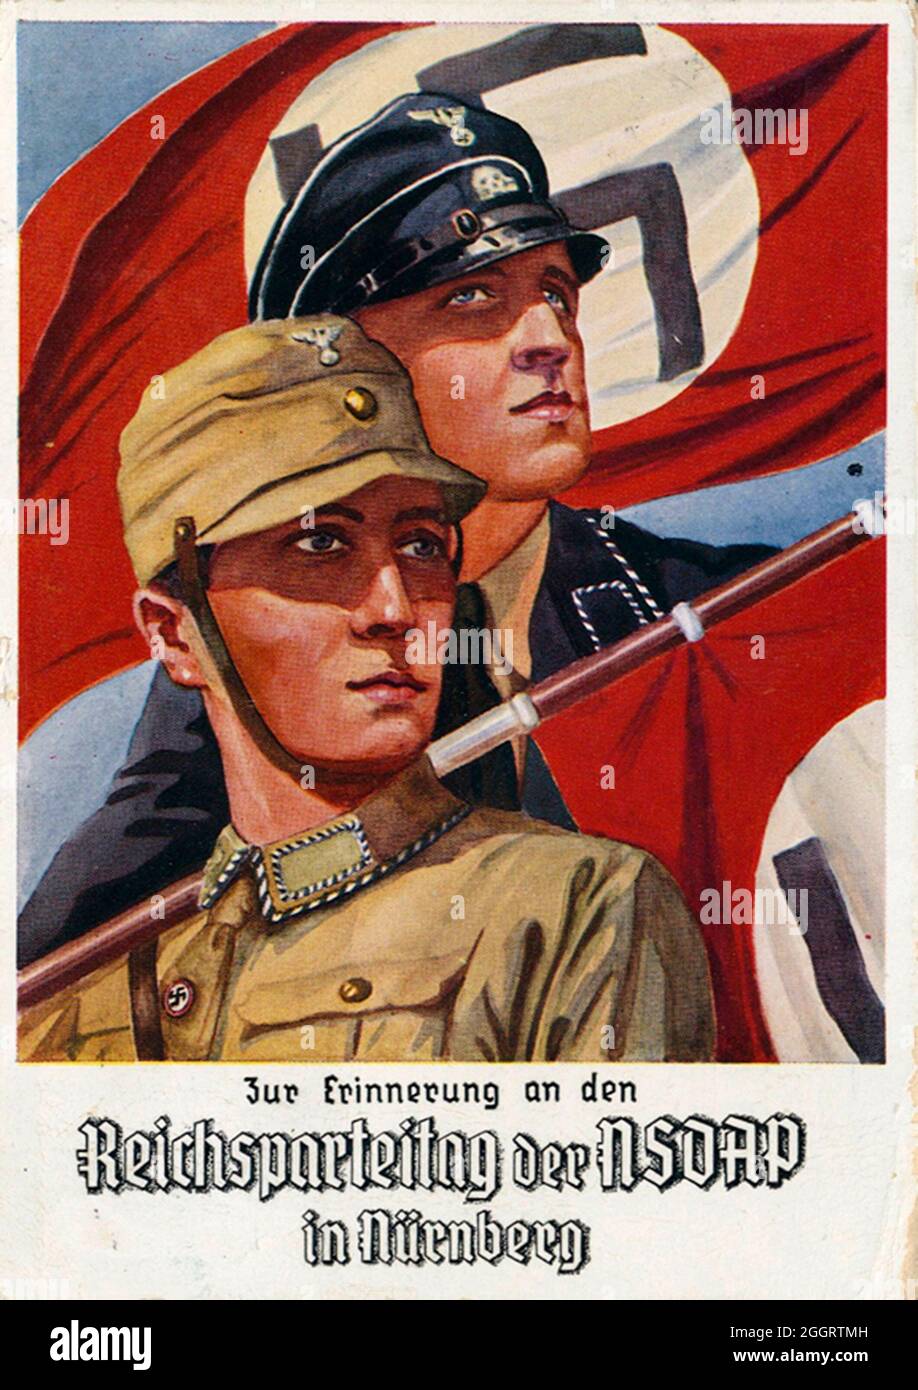 A vintage poster for the annual Nazi Nuremberg Rally showing SA and SS members Stock Photo